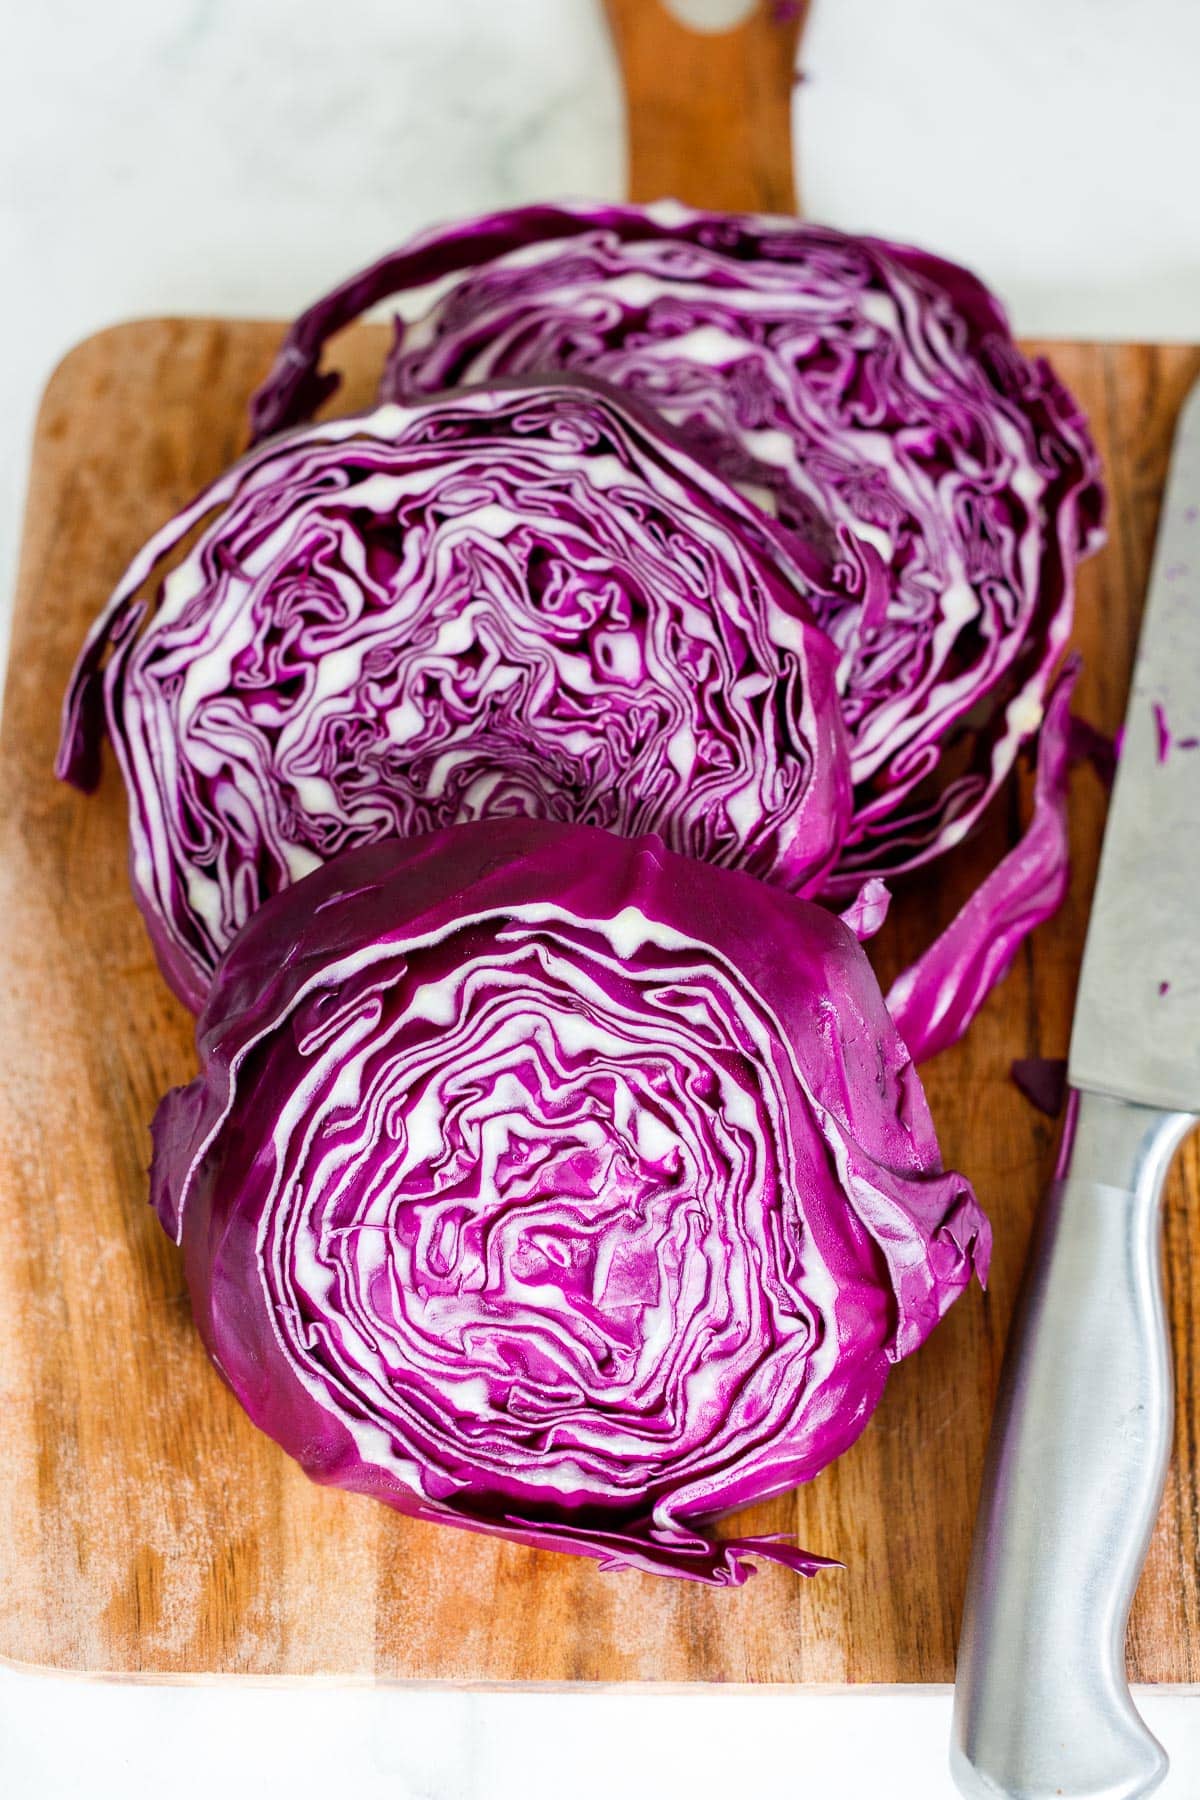 Cabbage slices on a cutting board.